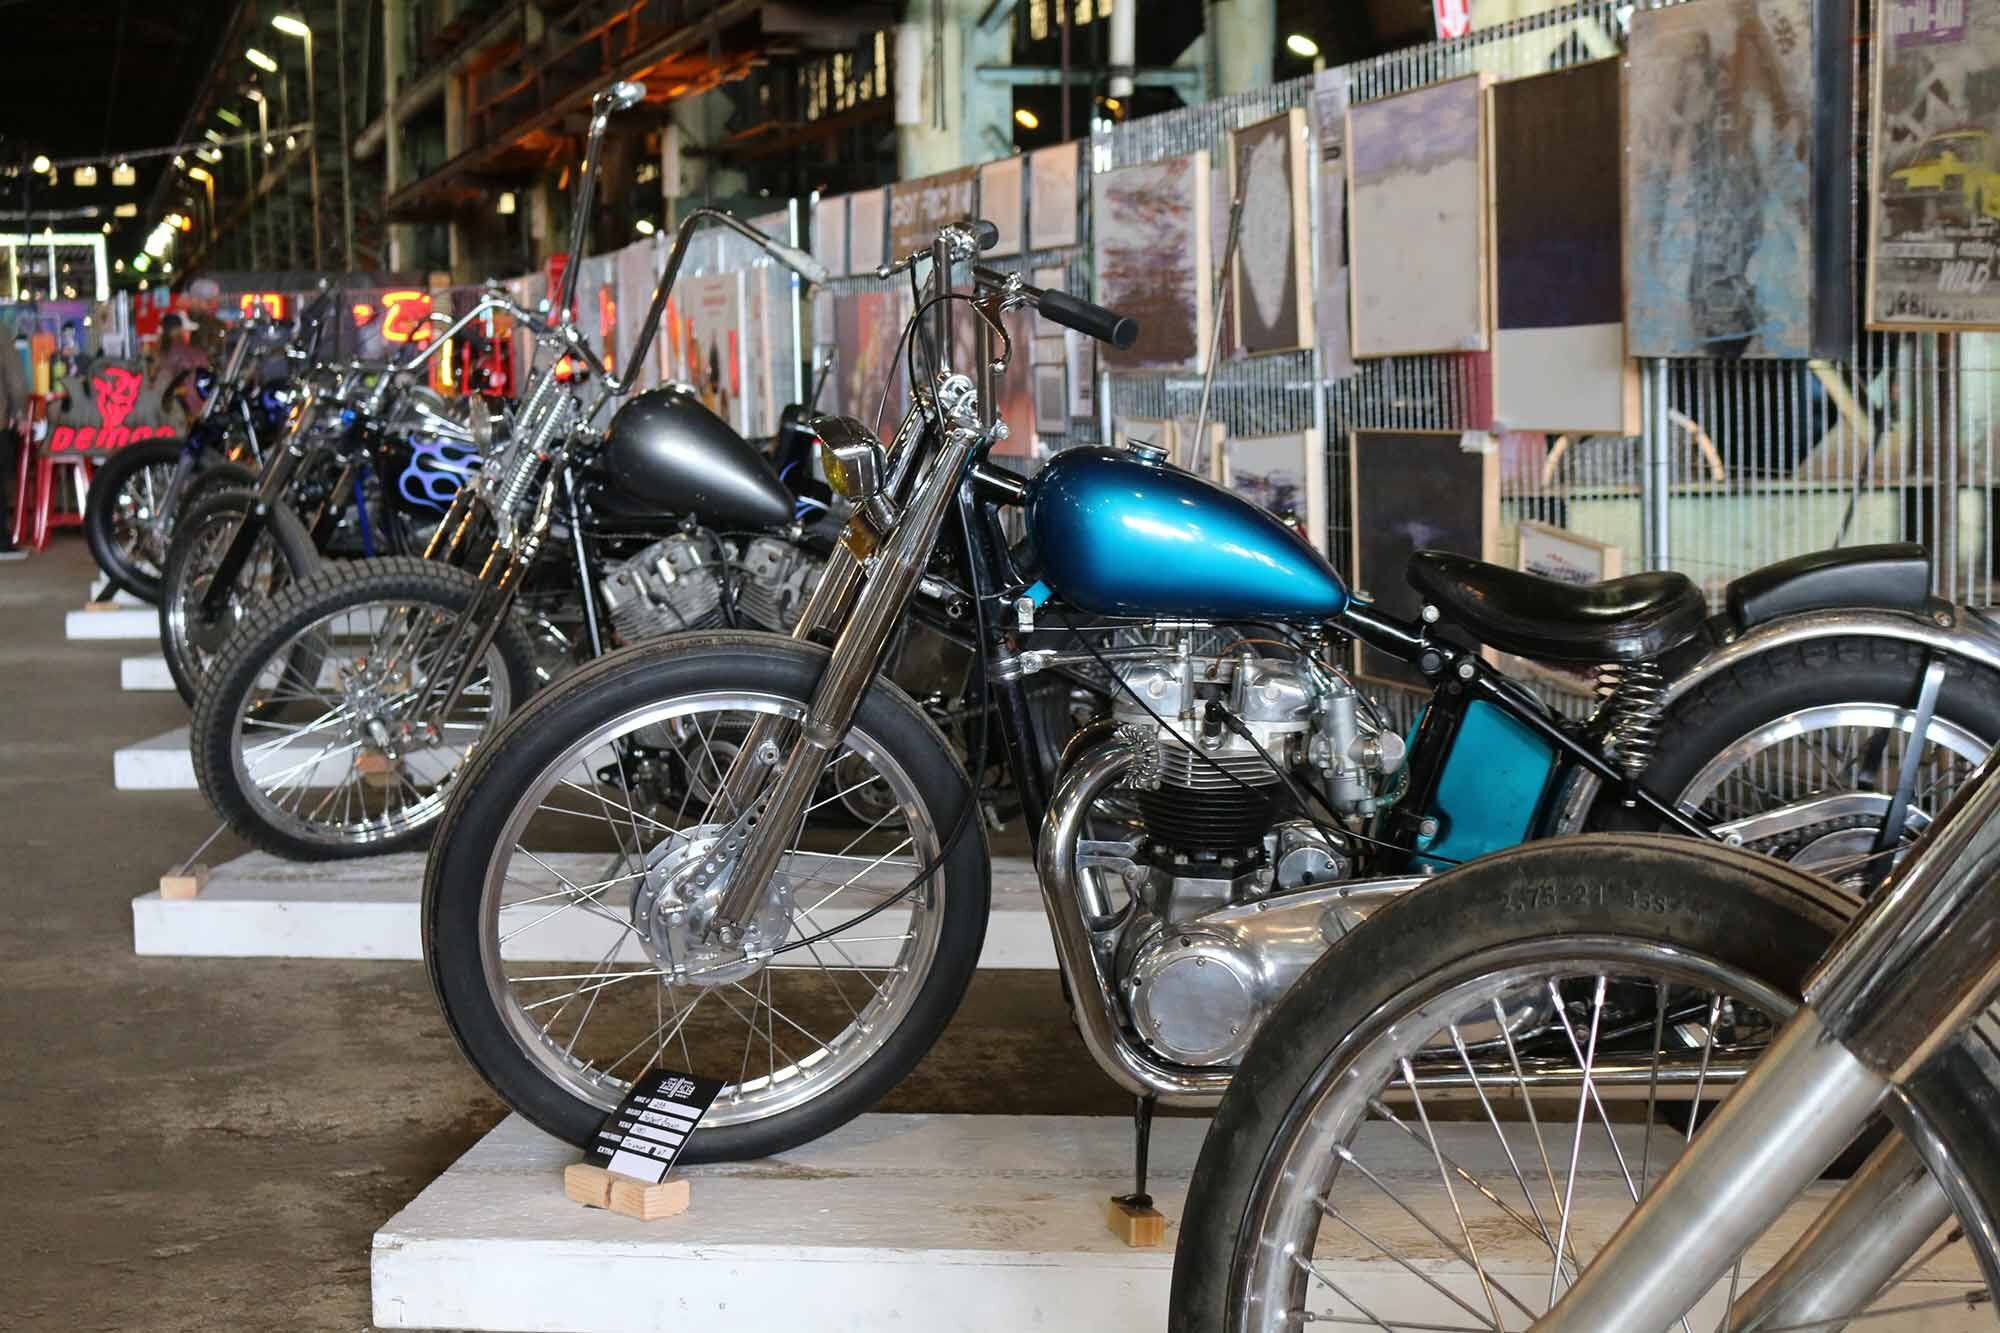 Custom motorcycles stretched as far as the eye could see at the 2022 One Moto Show.